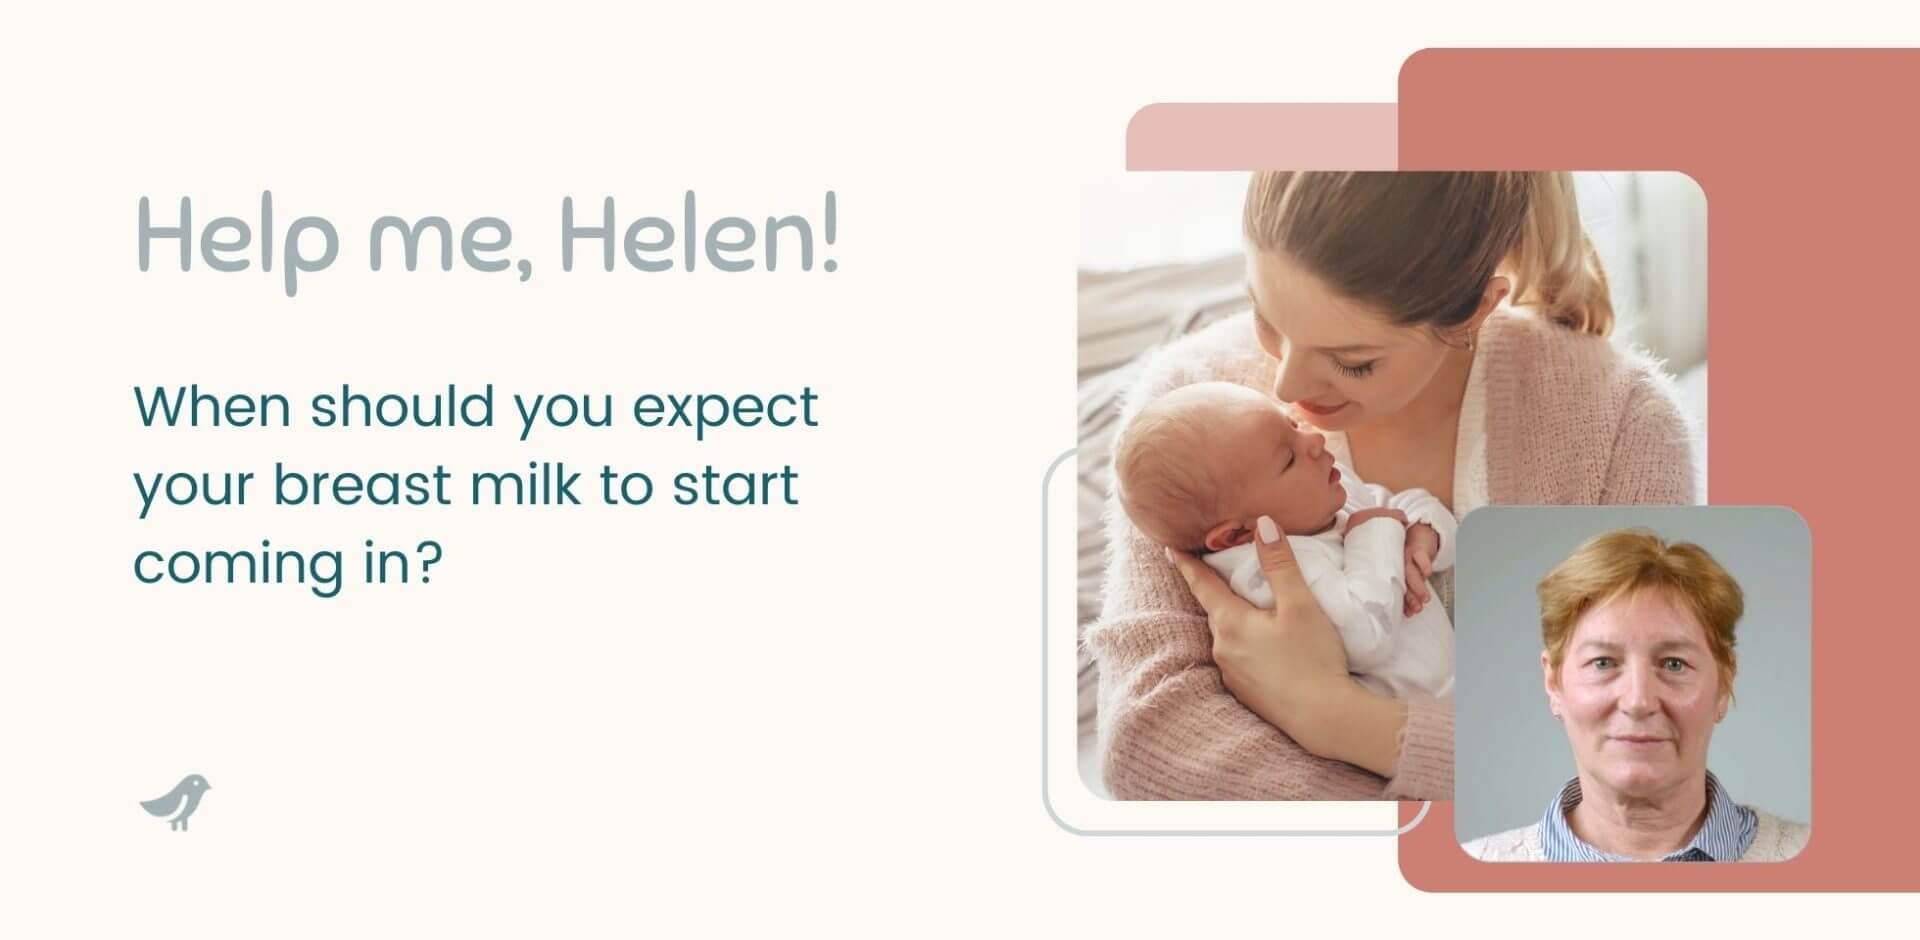 When should you expect your breast milk to start coming in?